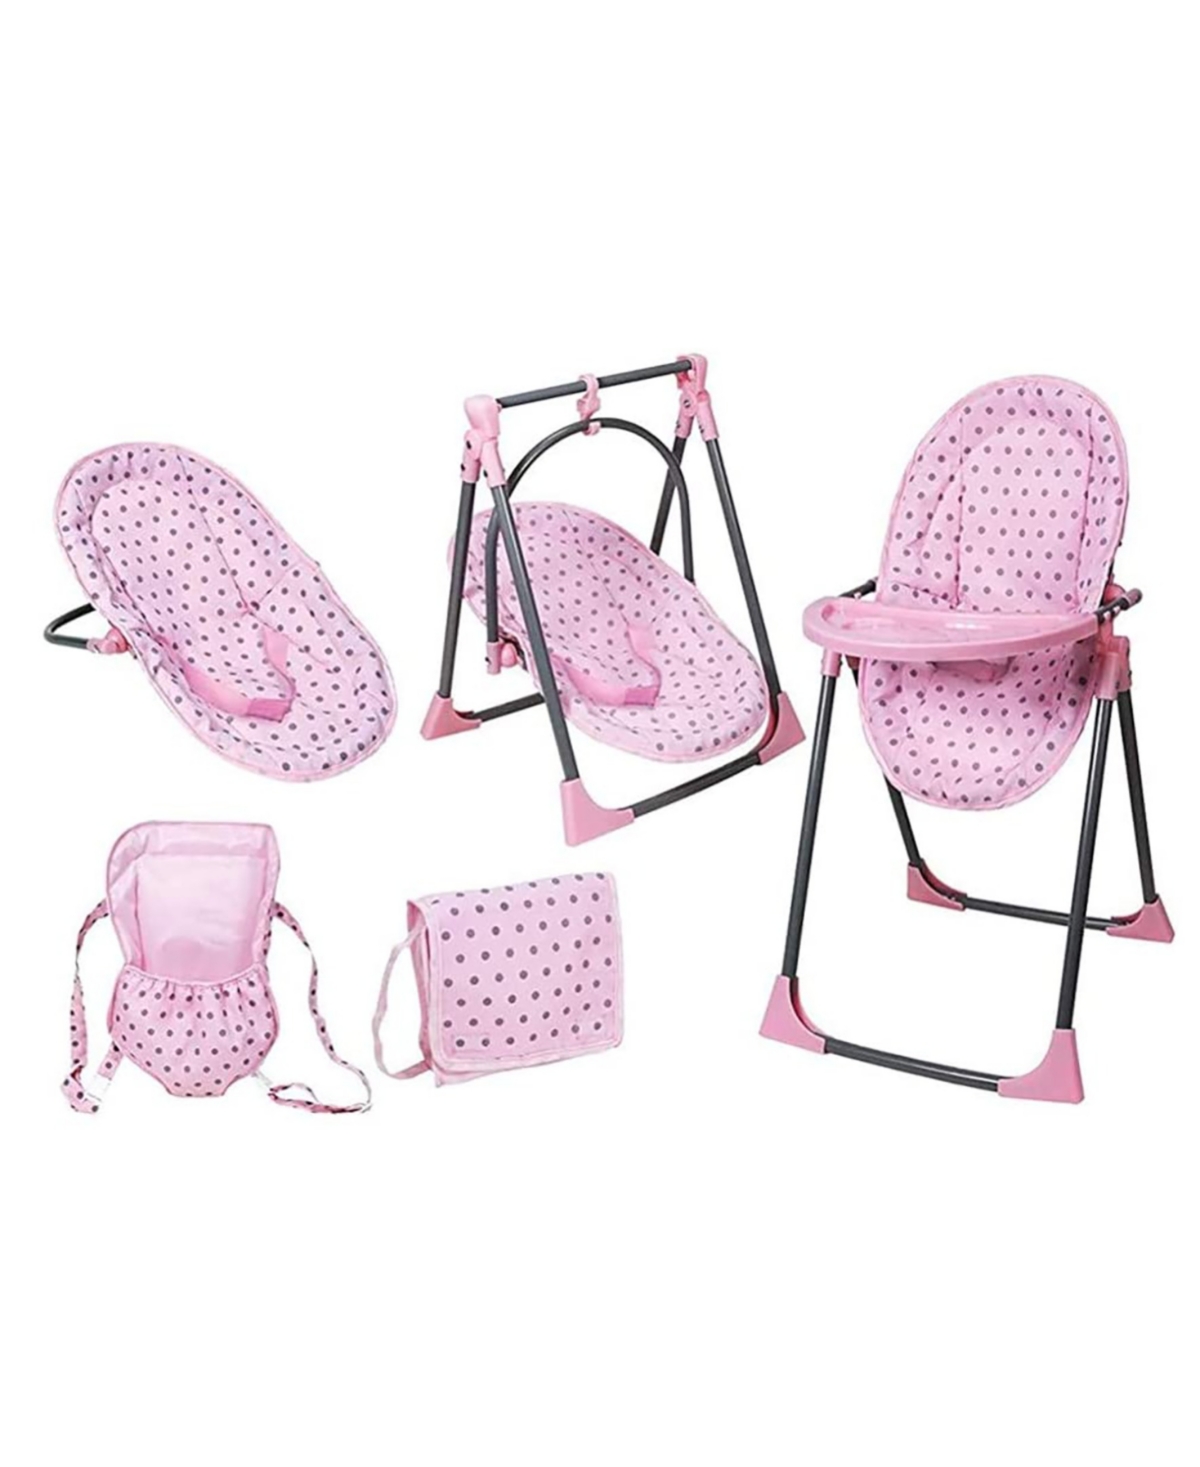 Lissi Dolls Lissi Doll 6-in-1 Convertible Highchair Play Set In Multi